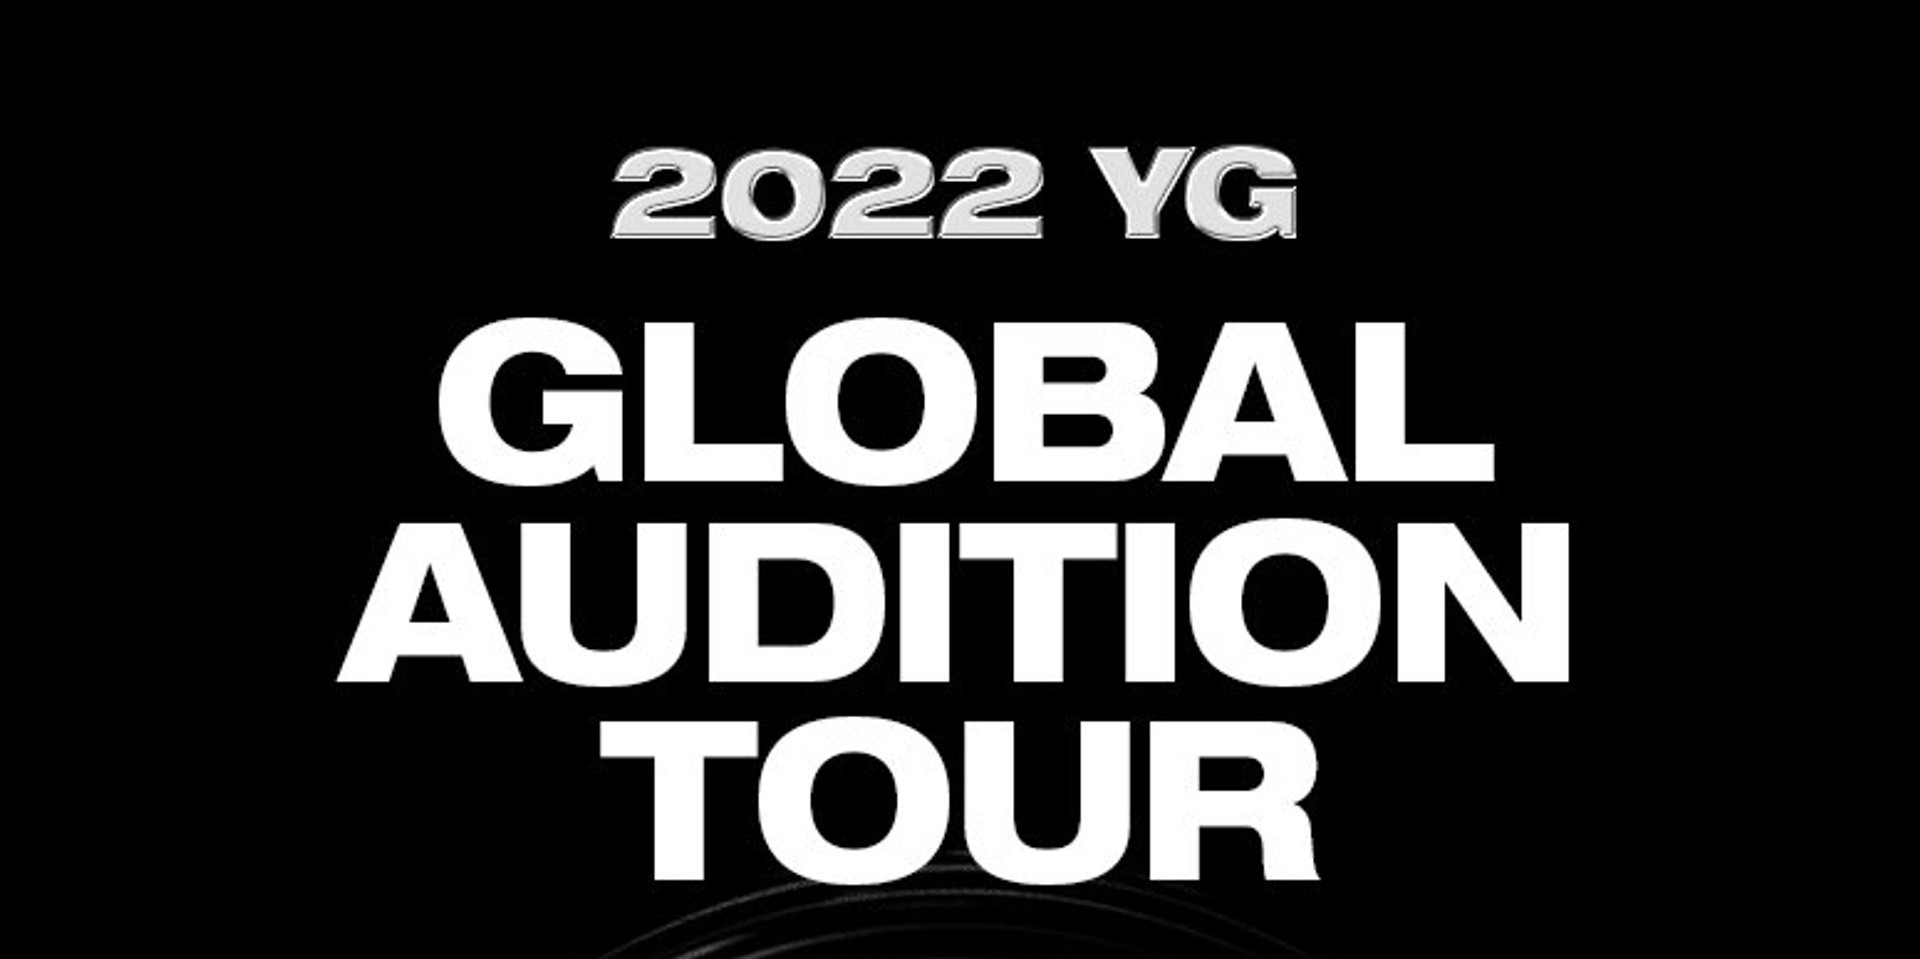 YG Entertainment to hold global audition tour in Japan